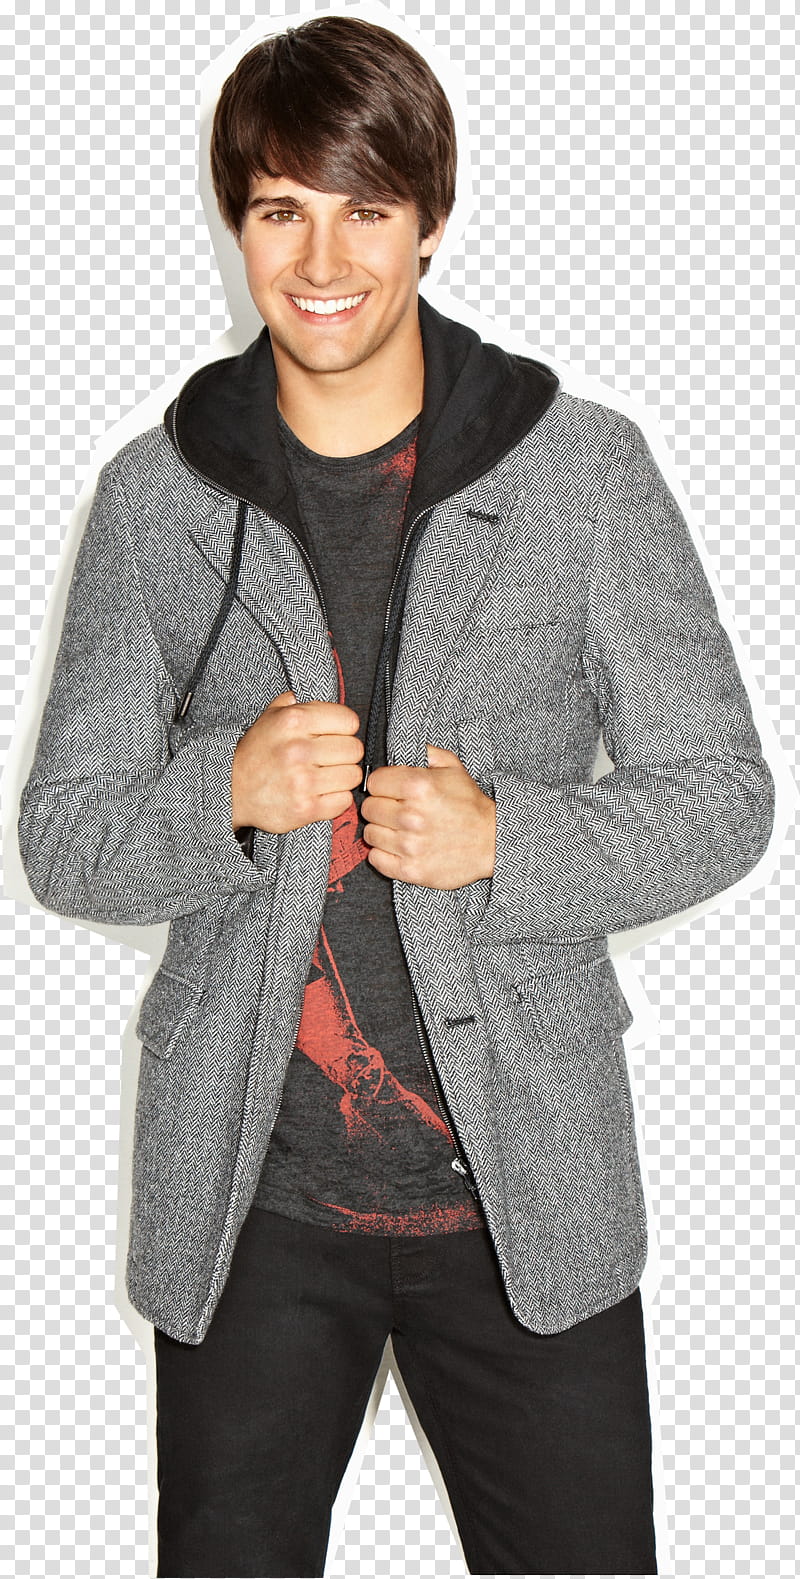 Big Time Rush, smiling man holding his jacket transparent background PNG clipart